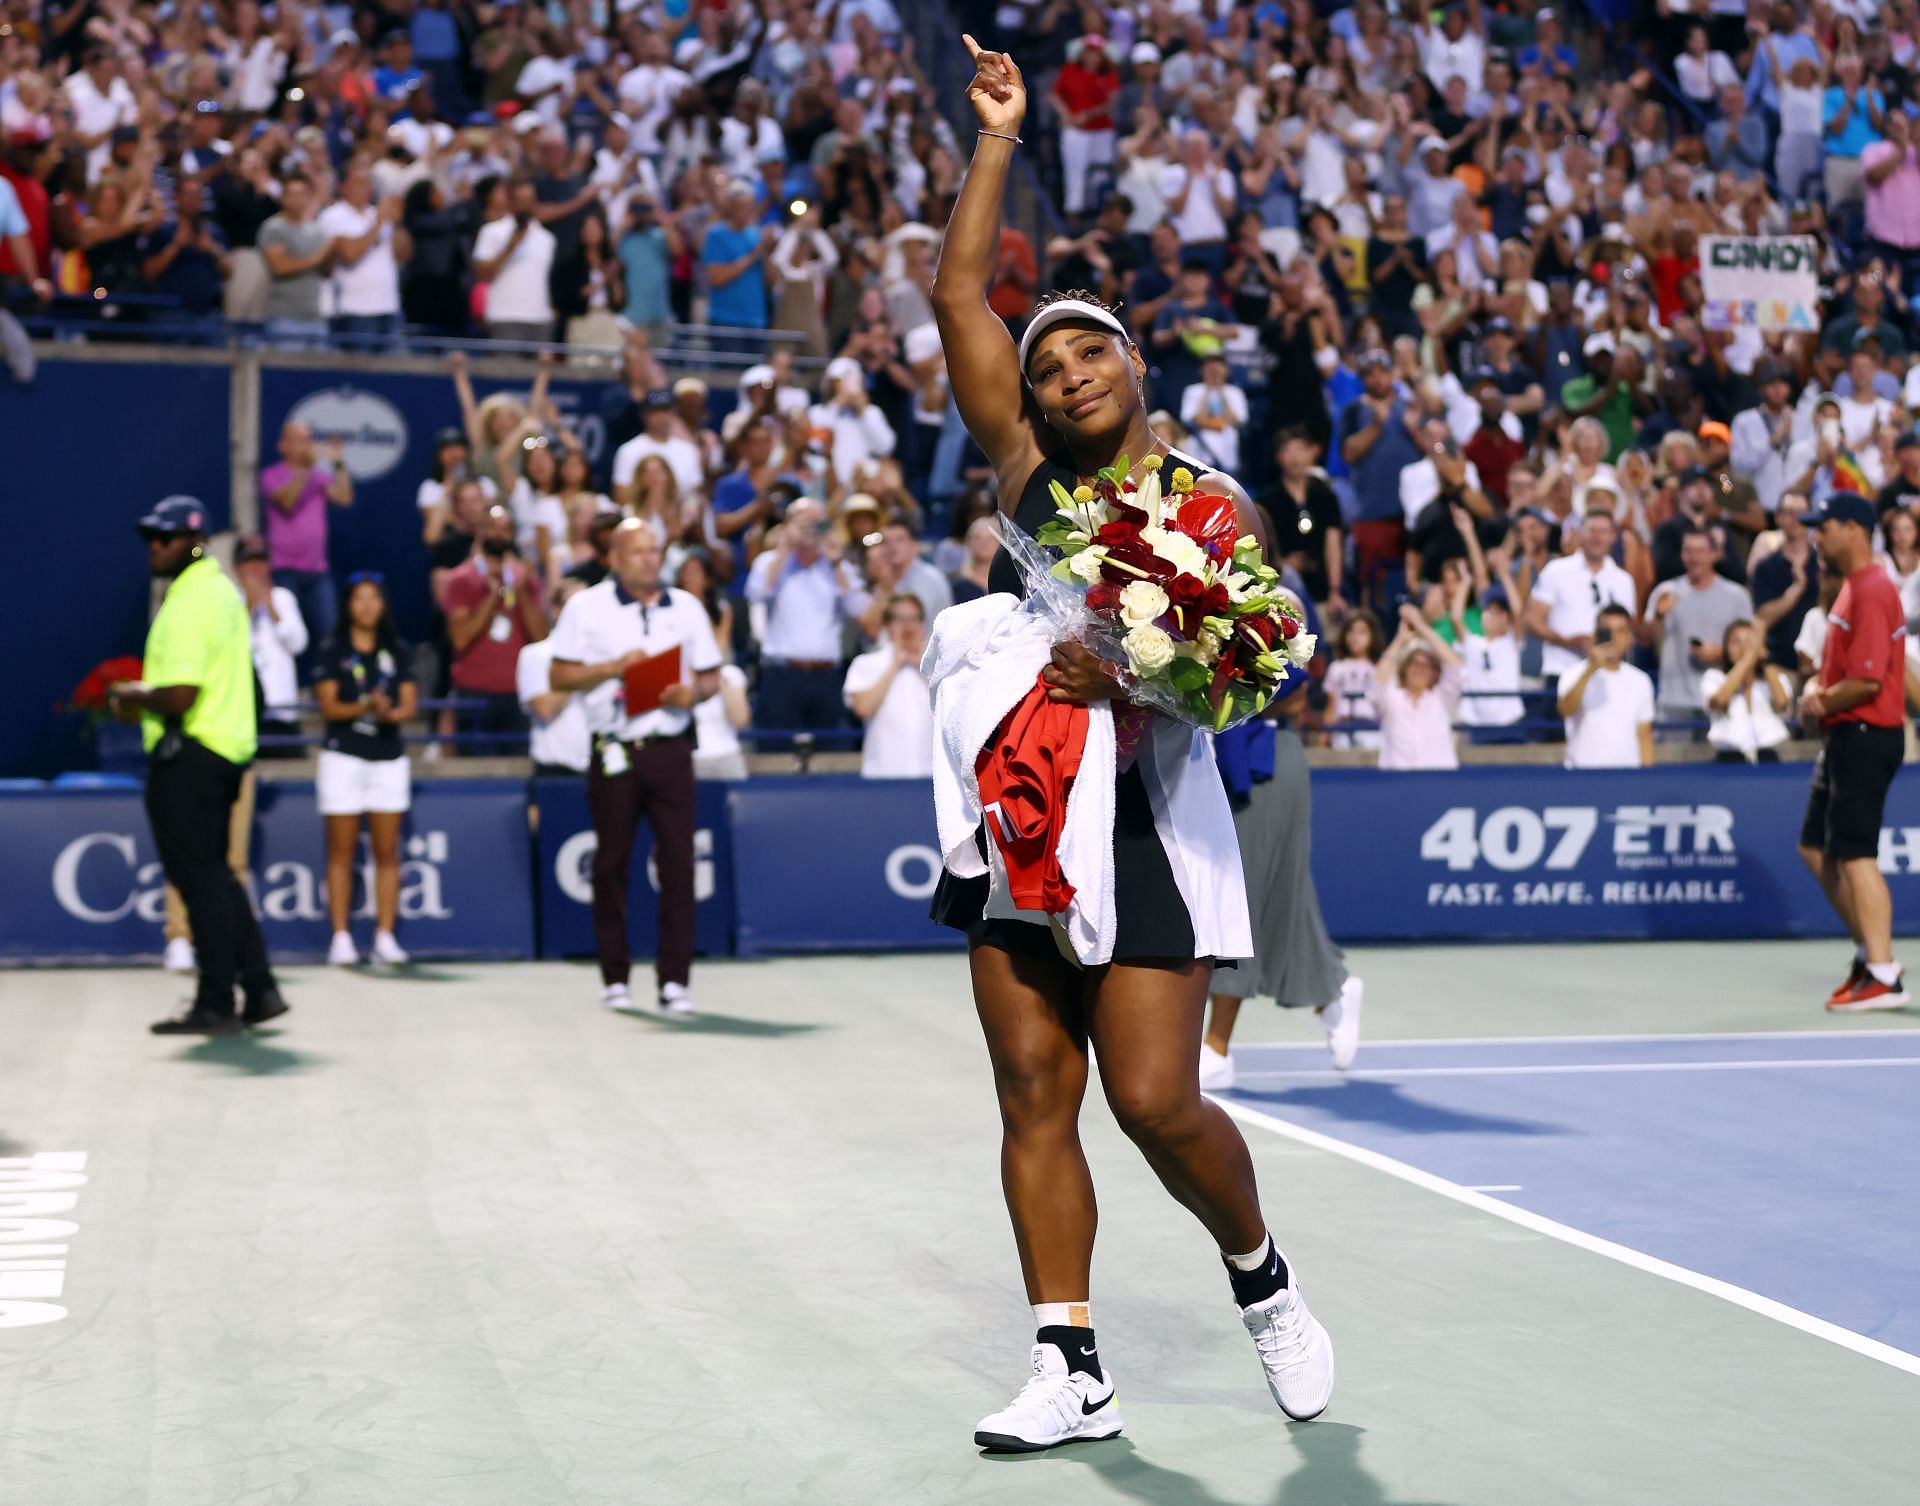 Serena Williams waves goodbye to the crowd at the 2022 Canadian Open